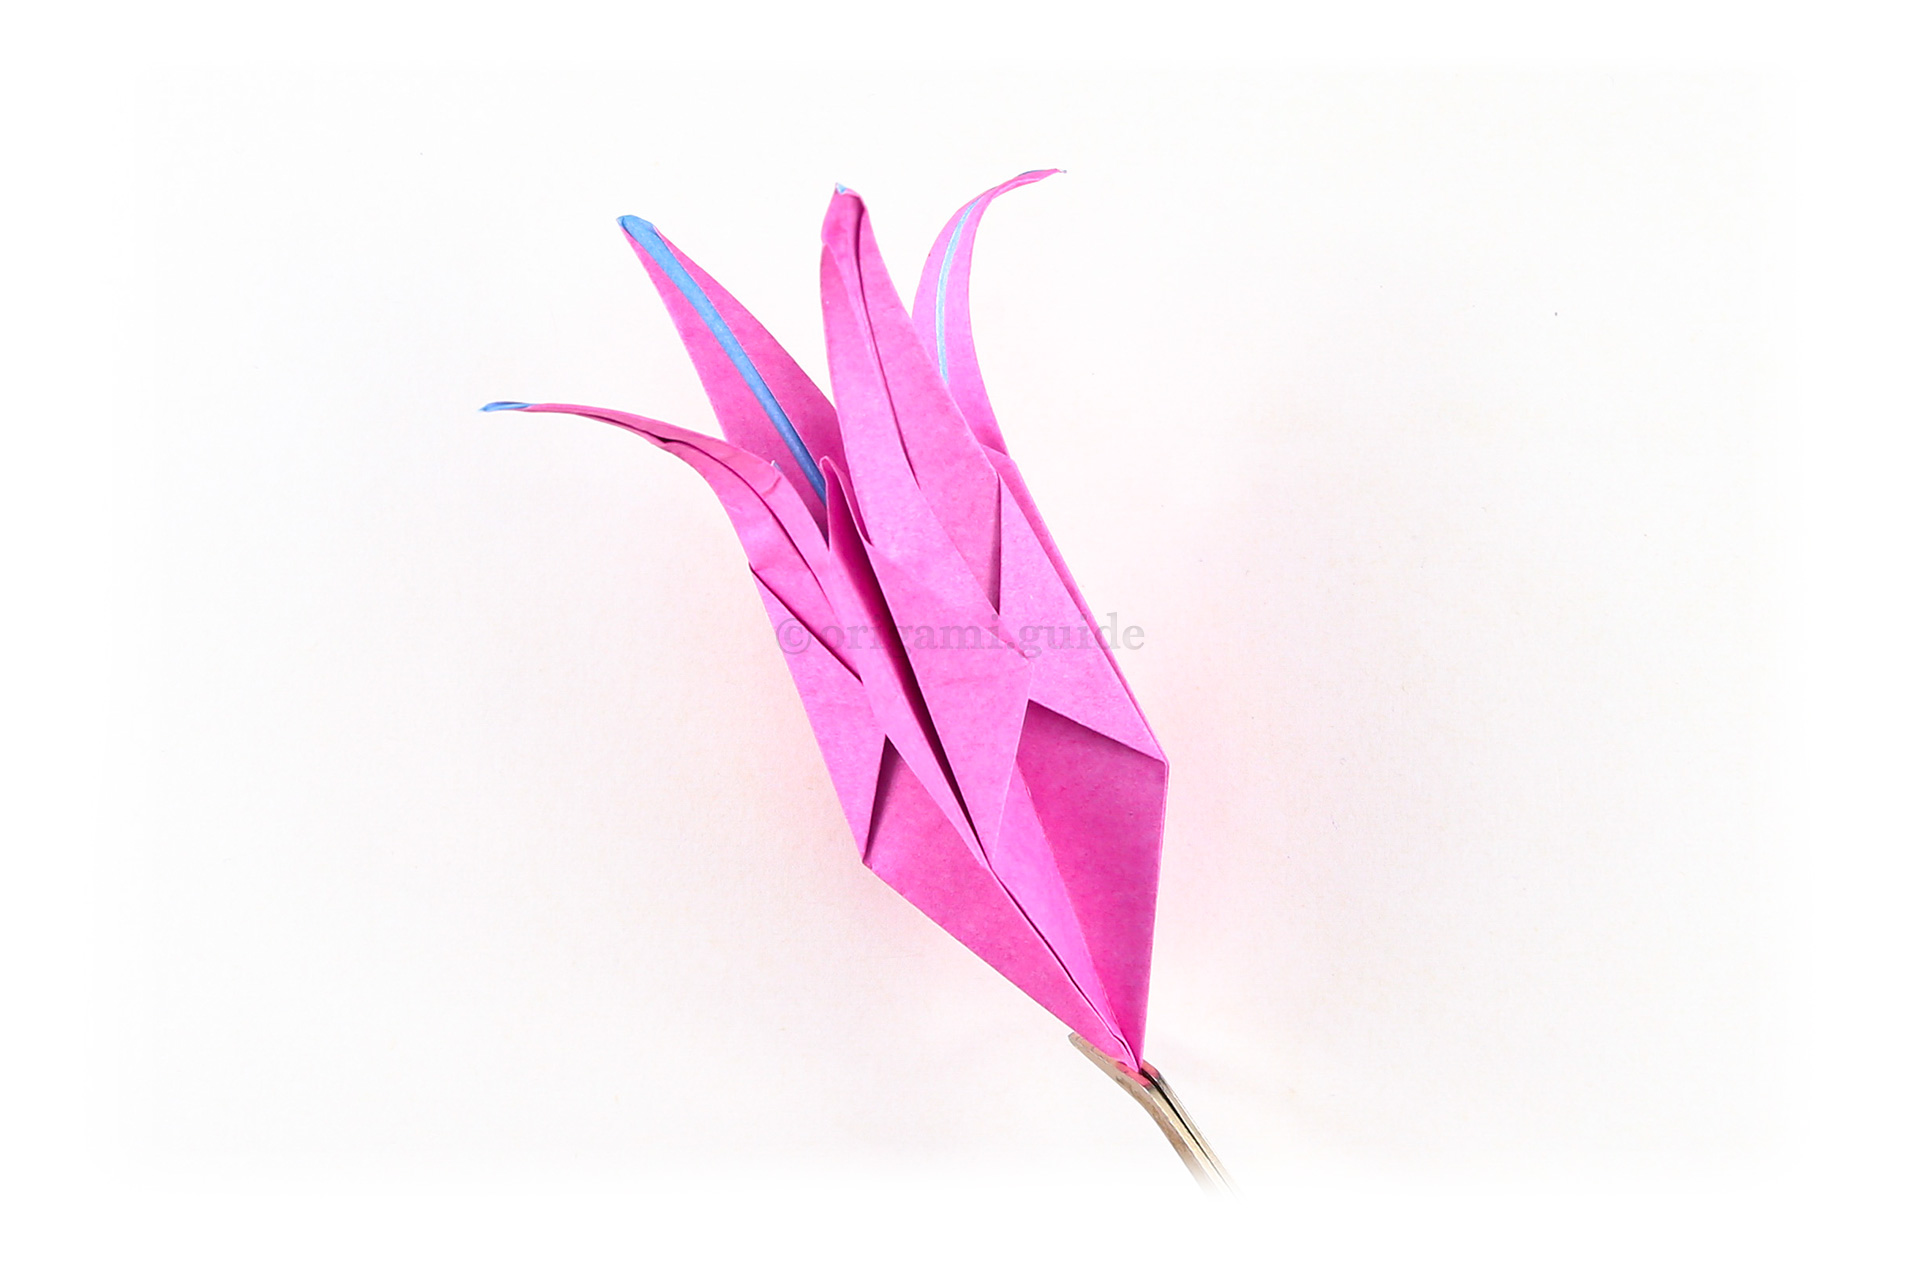 Here is the completed origami lily bud